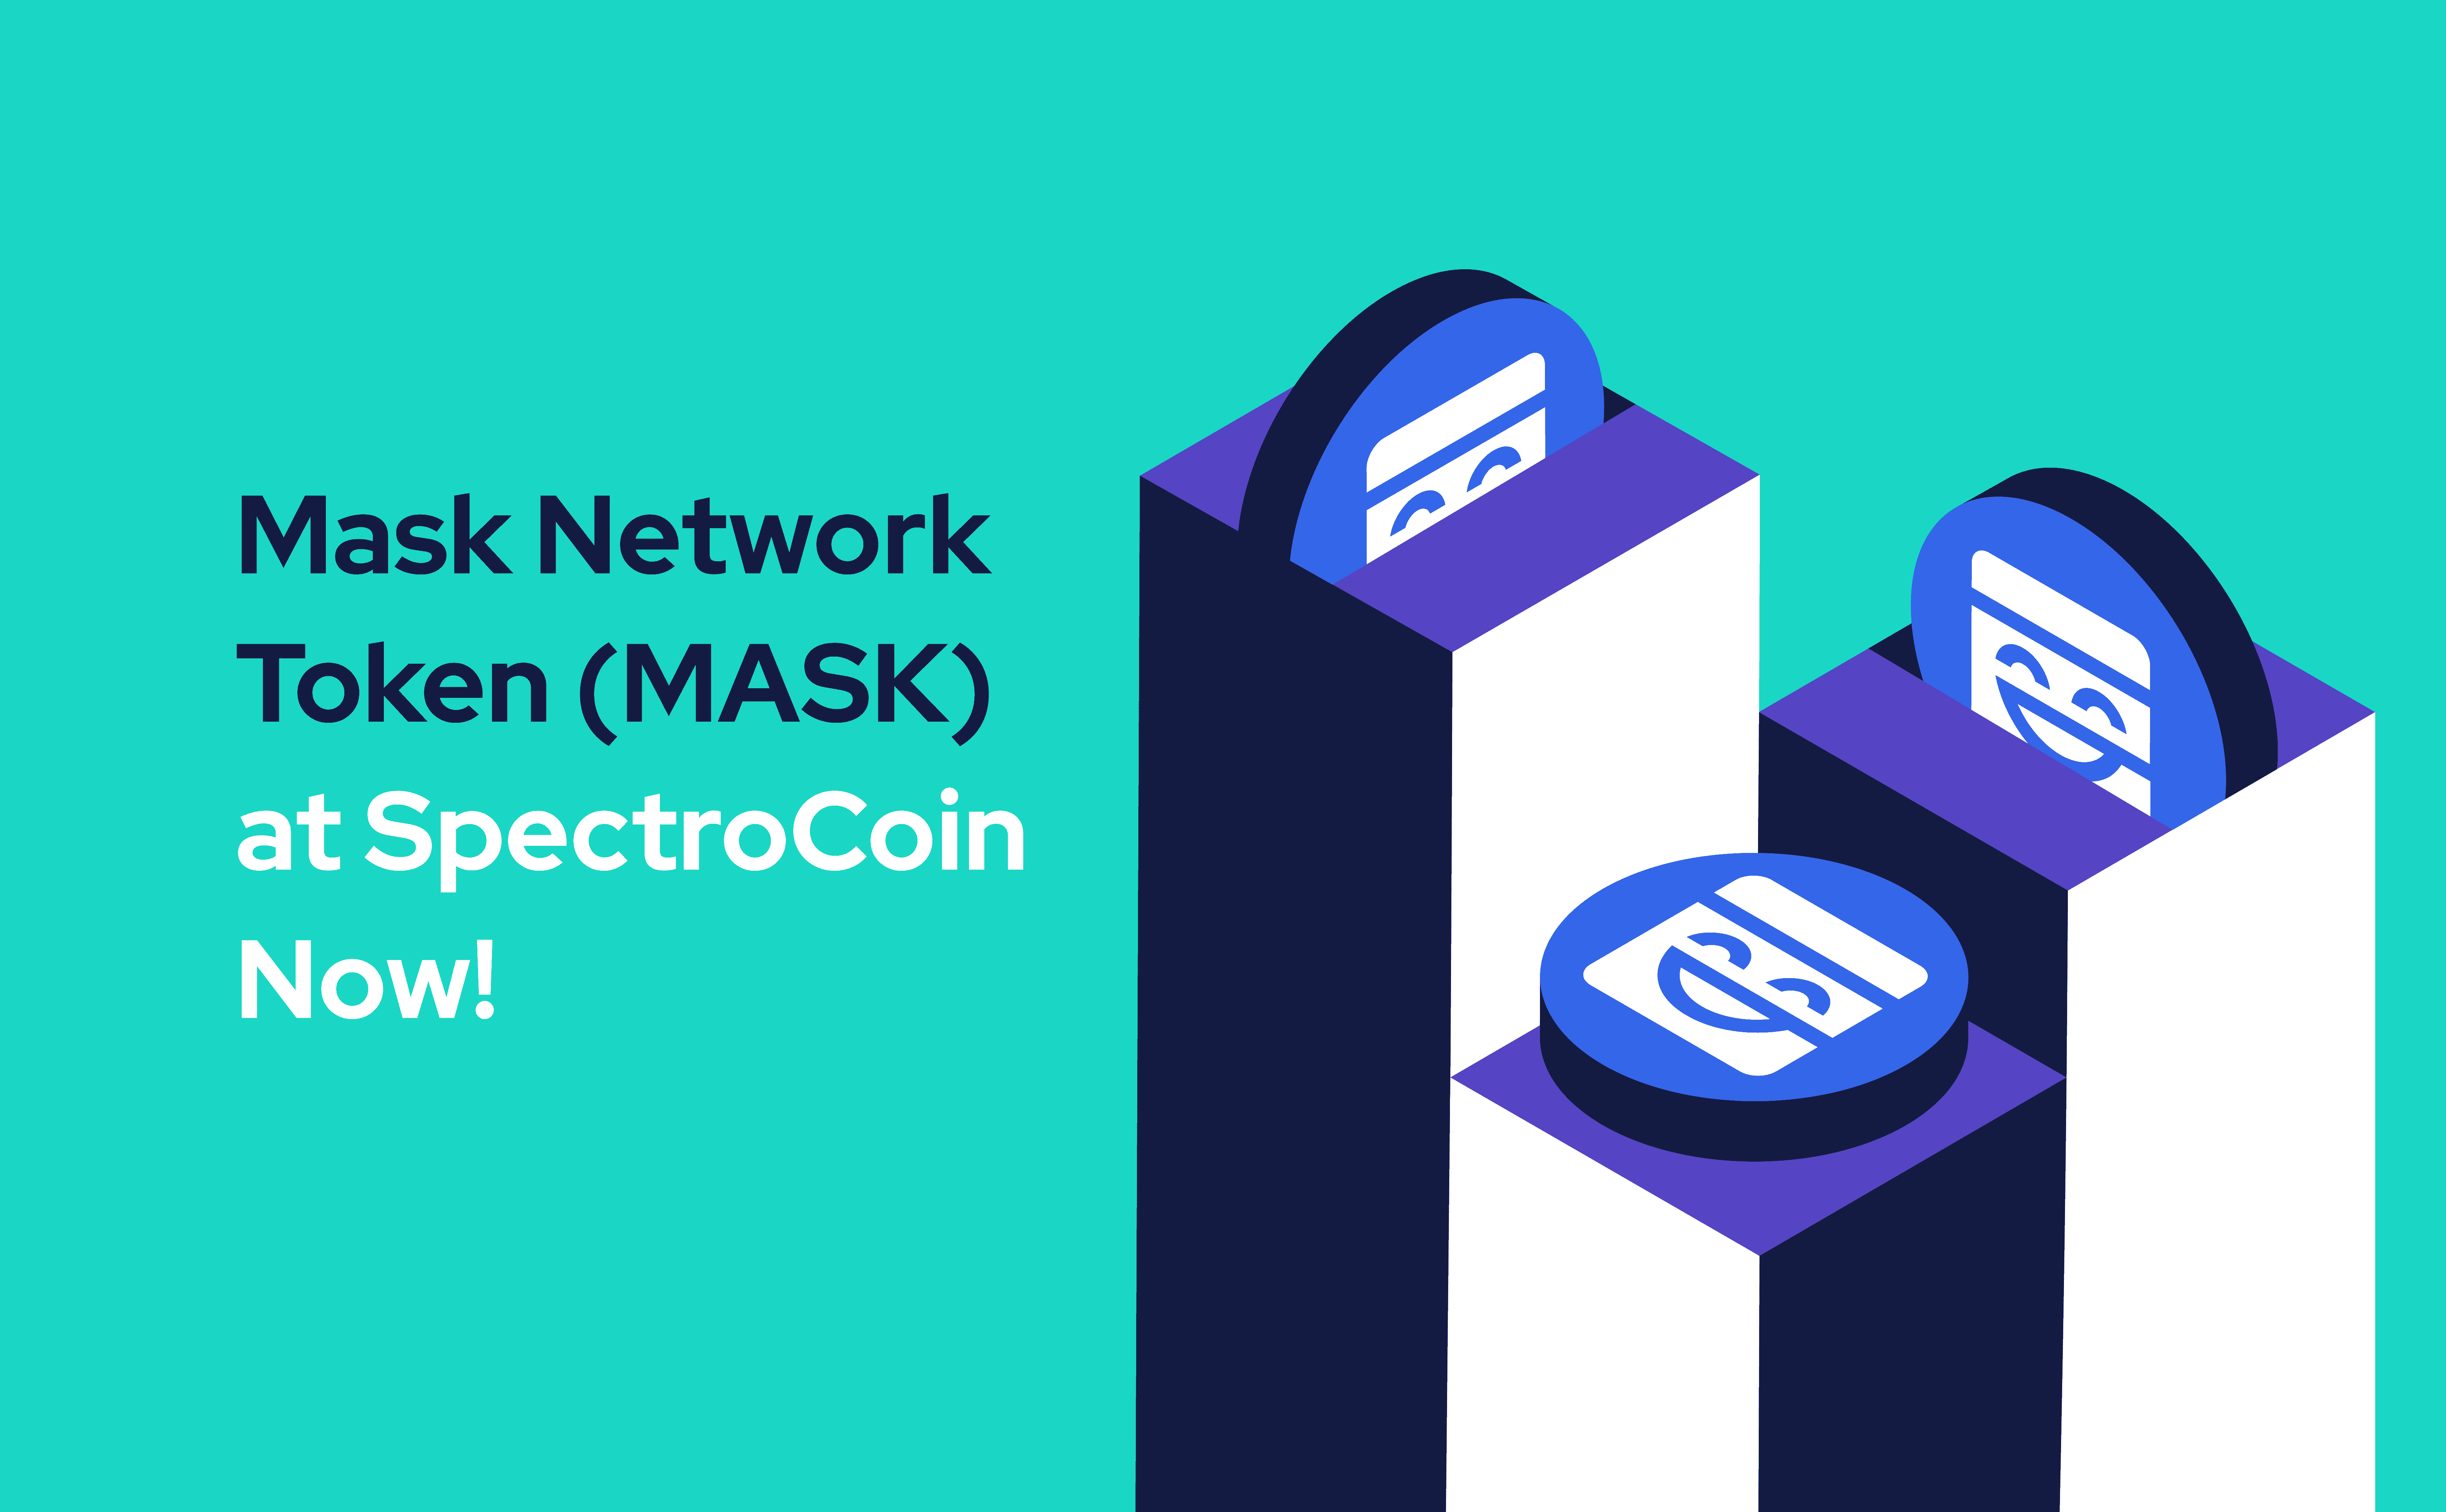 Withdraw, trade and accept Mask Token